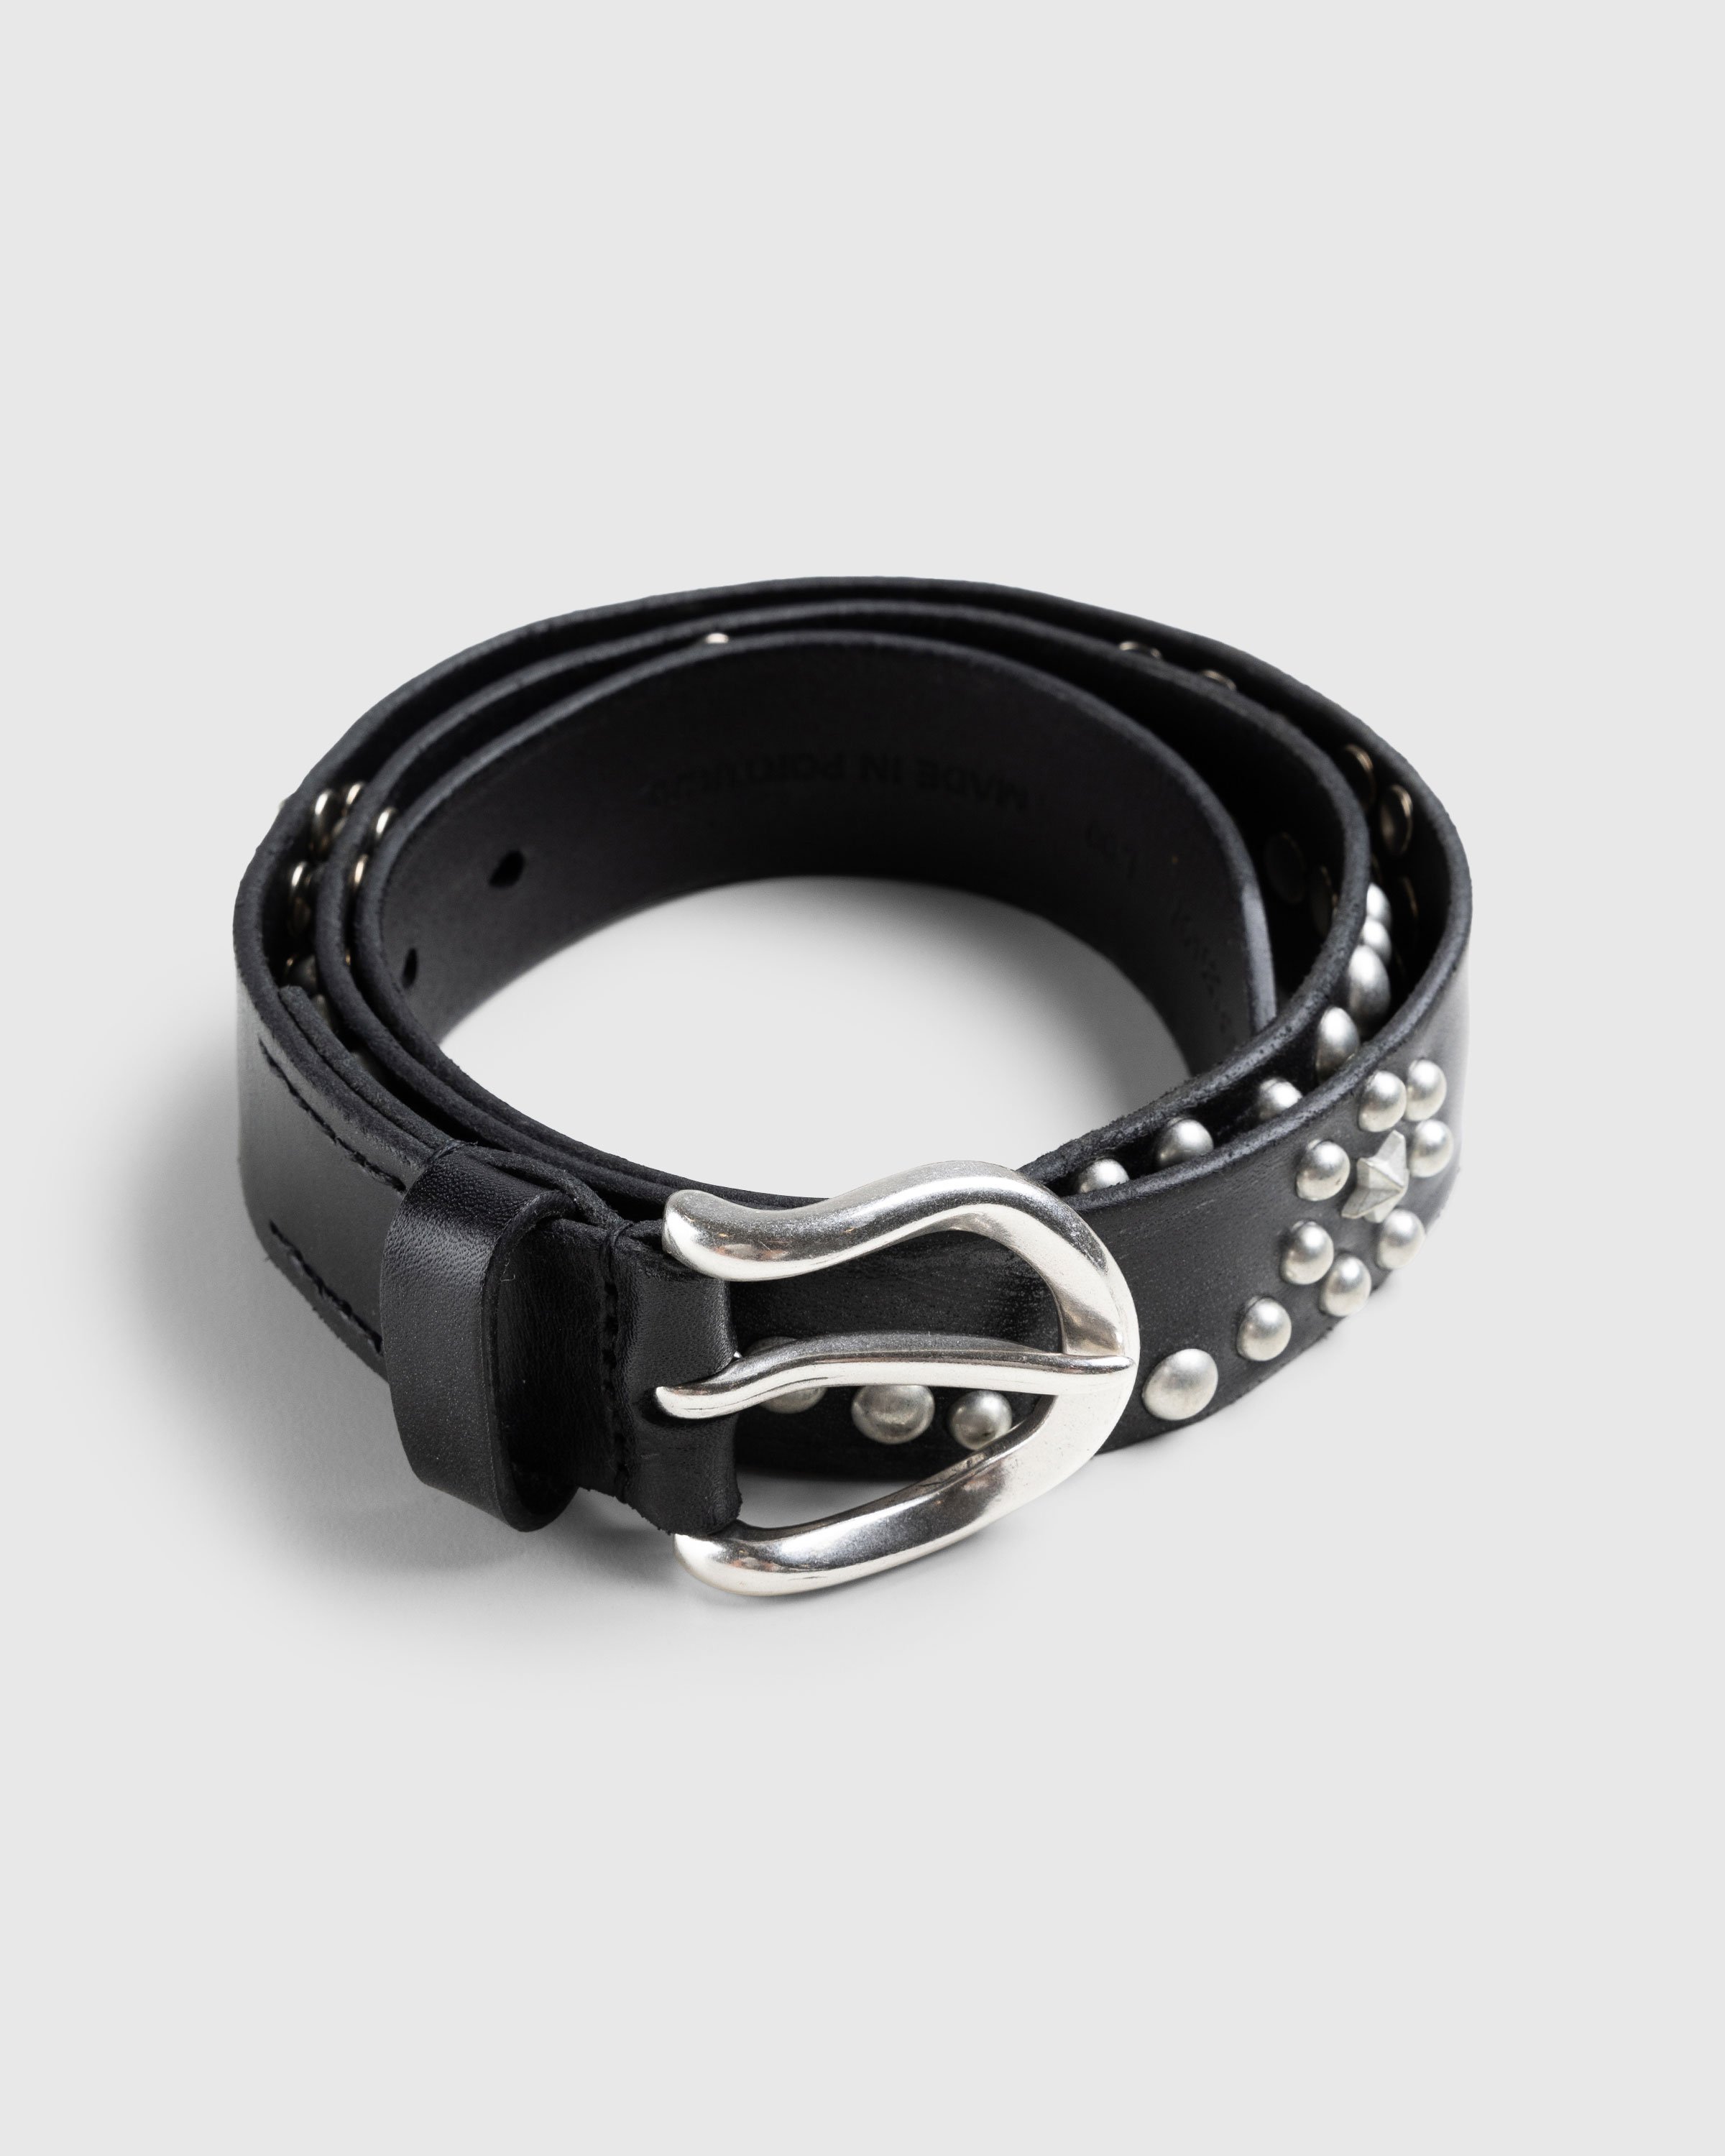 Our Legacy - STAR FALL BELT Black - Accessories - Black - Image 2